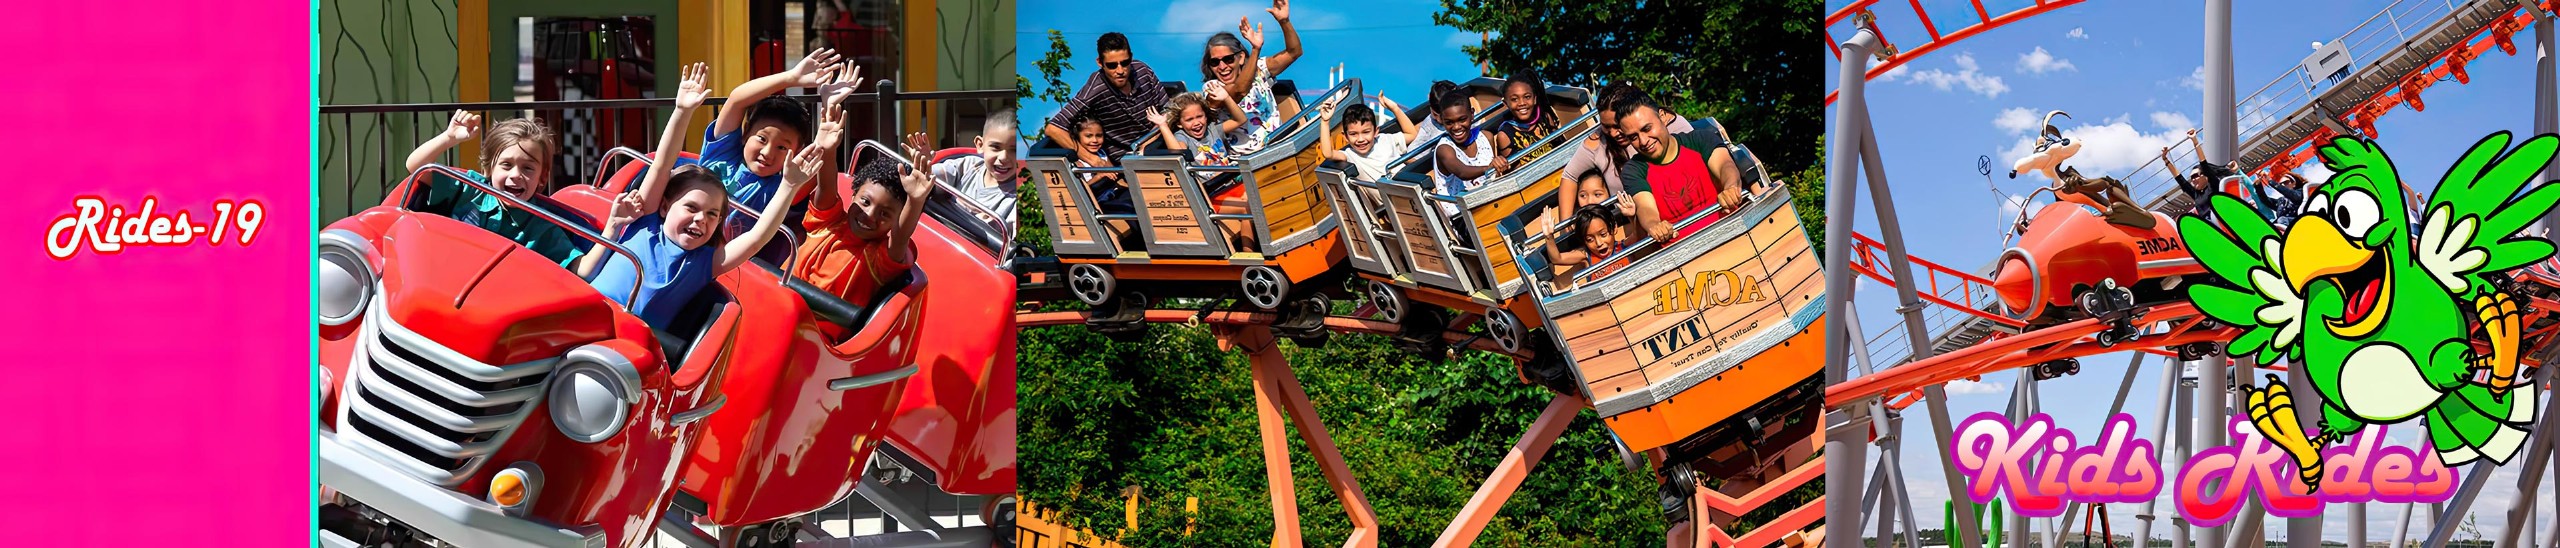 best attractions  rides rollercoasters for theme parks 19